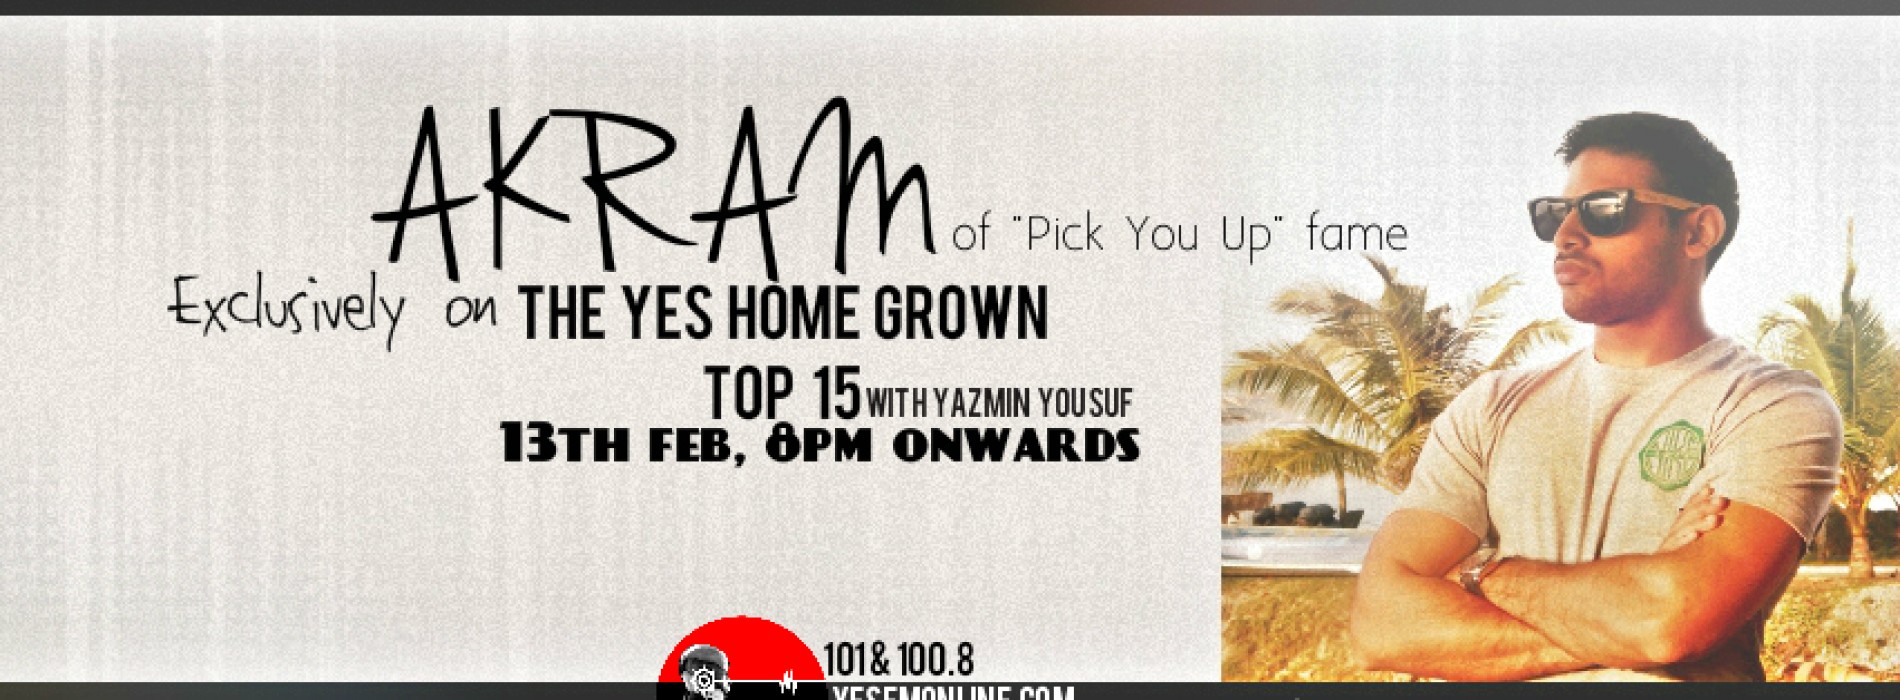 Akram On The YES Home Grown Top 15